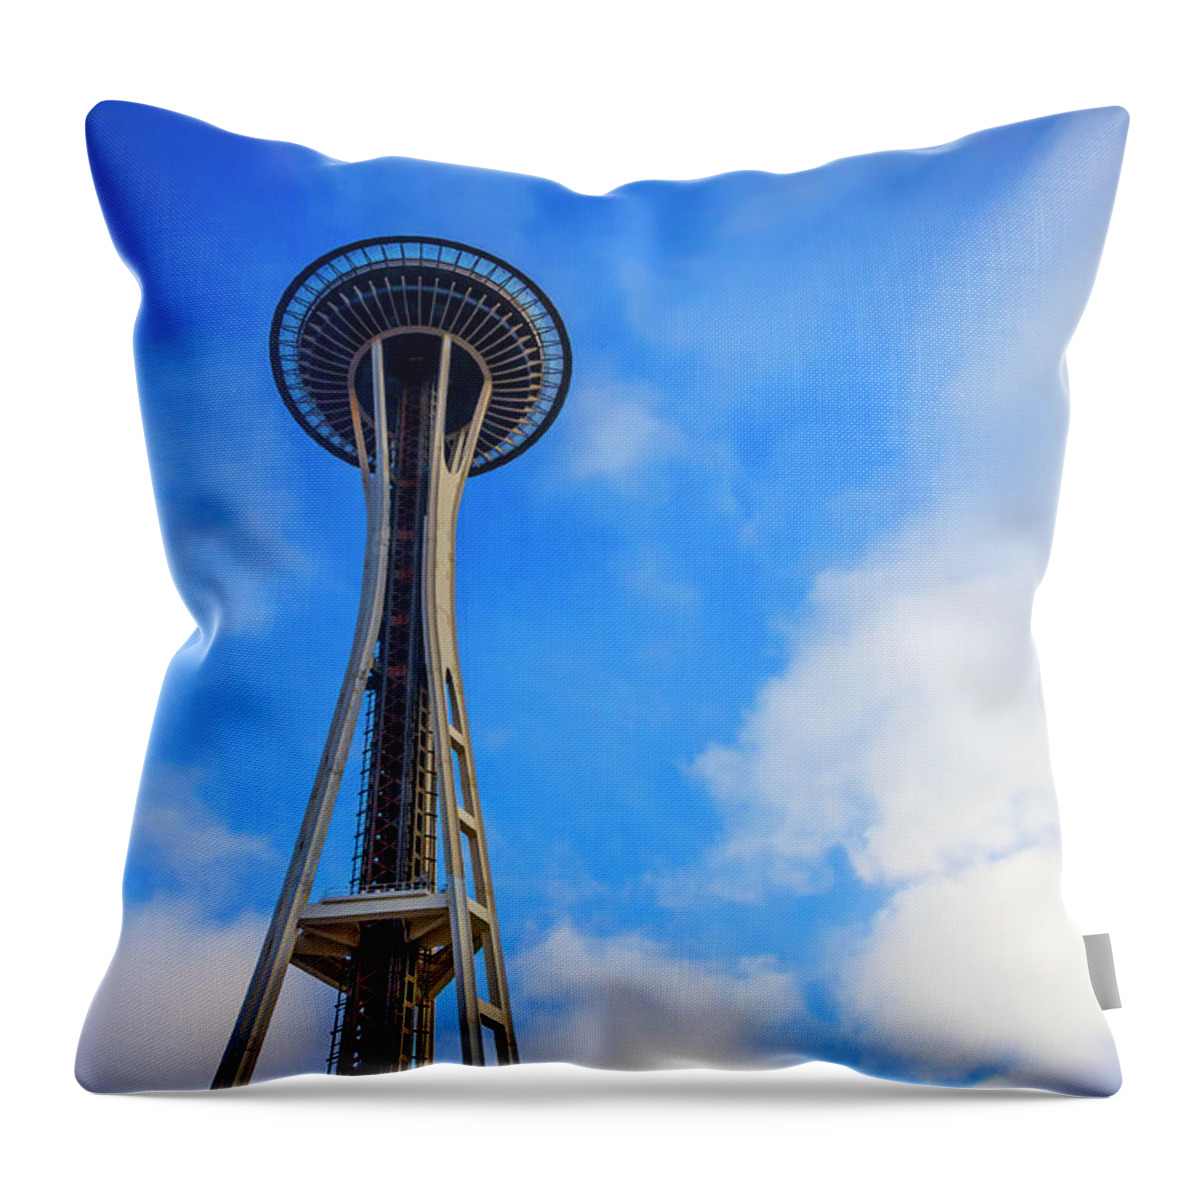 Seattle Space Needle Throw Pillow featuring the photograph Seattle Space Needle by Garry Gay